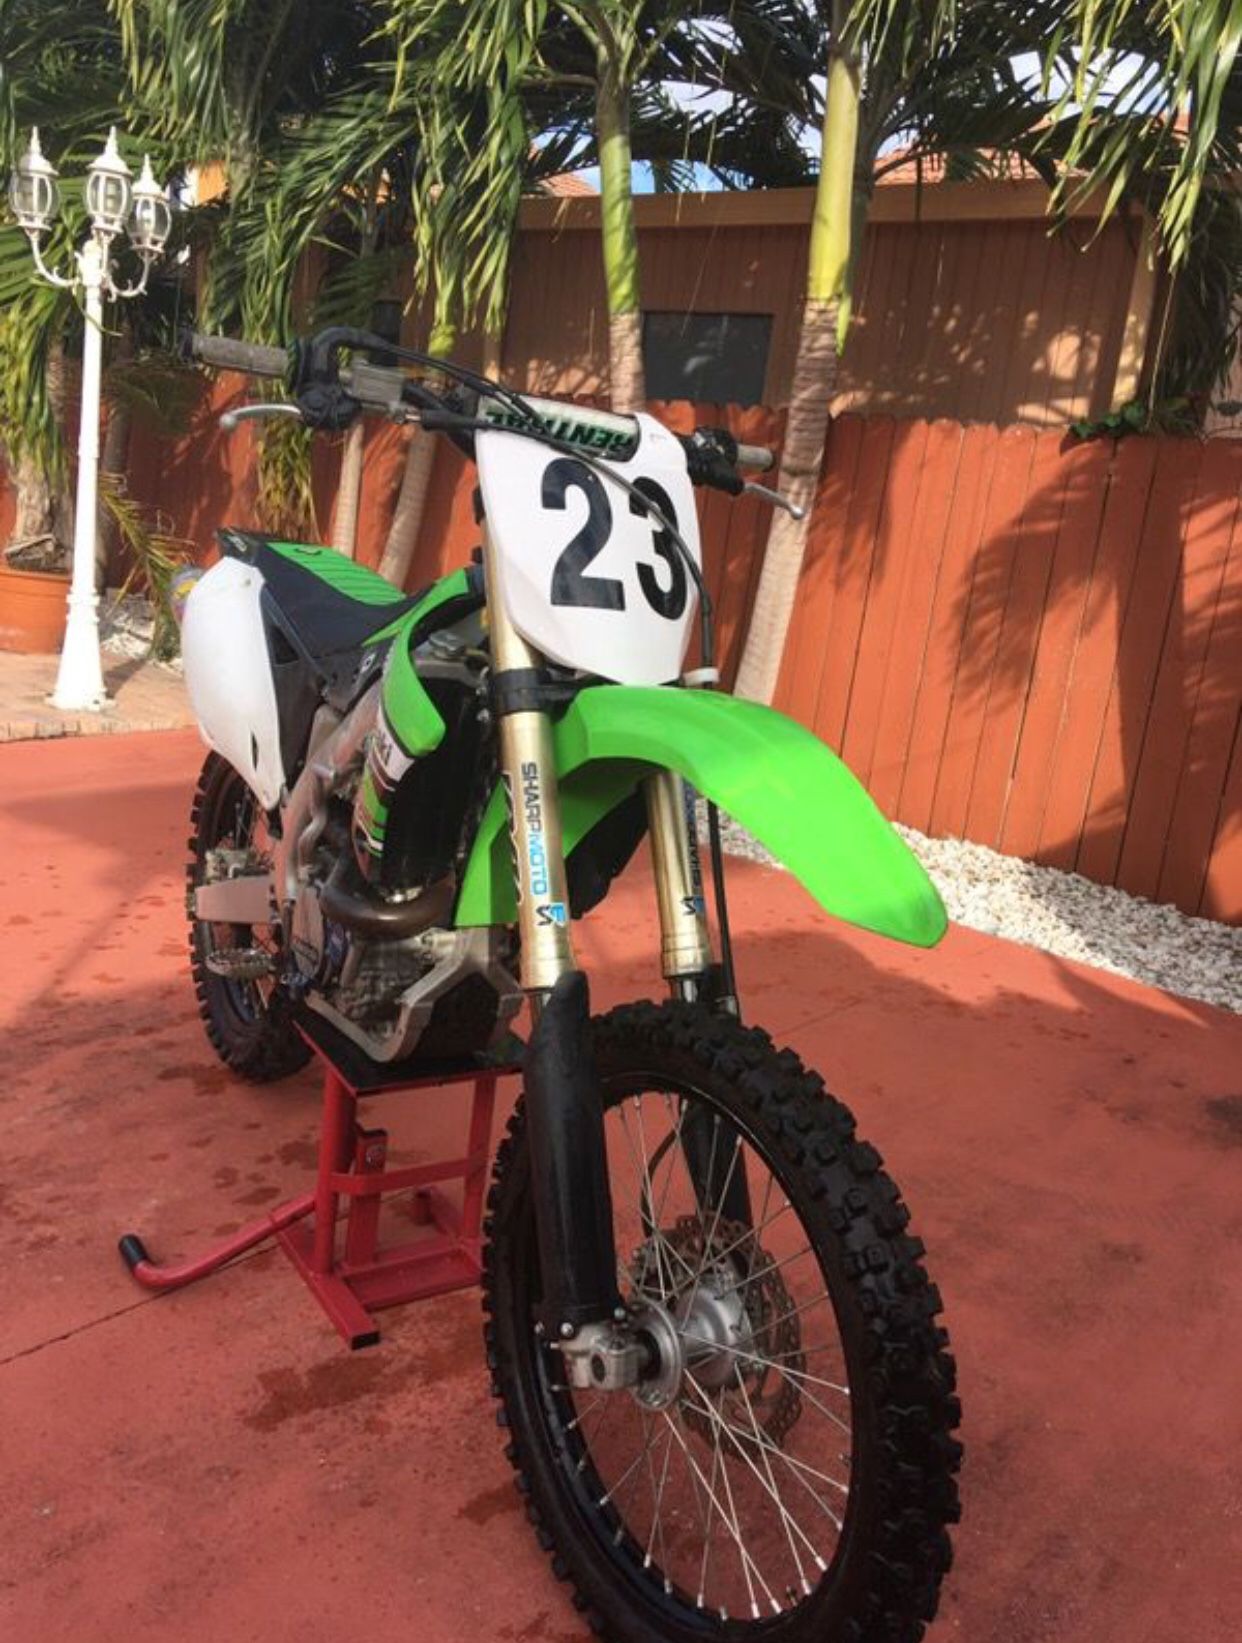 Kx450FI 2012 with title (perfect holiday gift and ready for MLK)